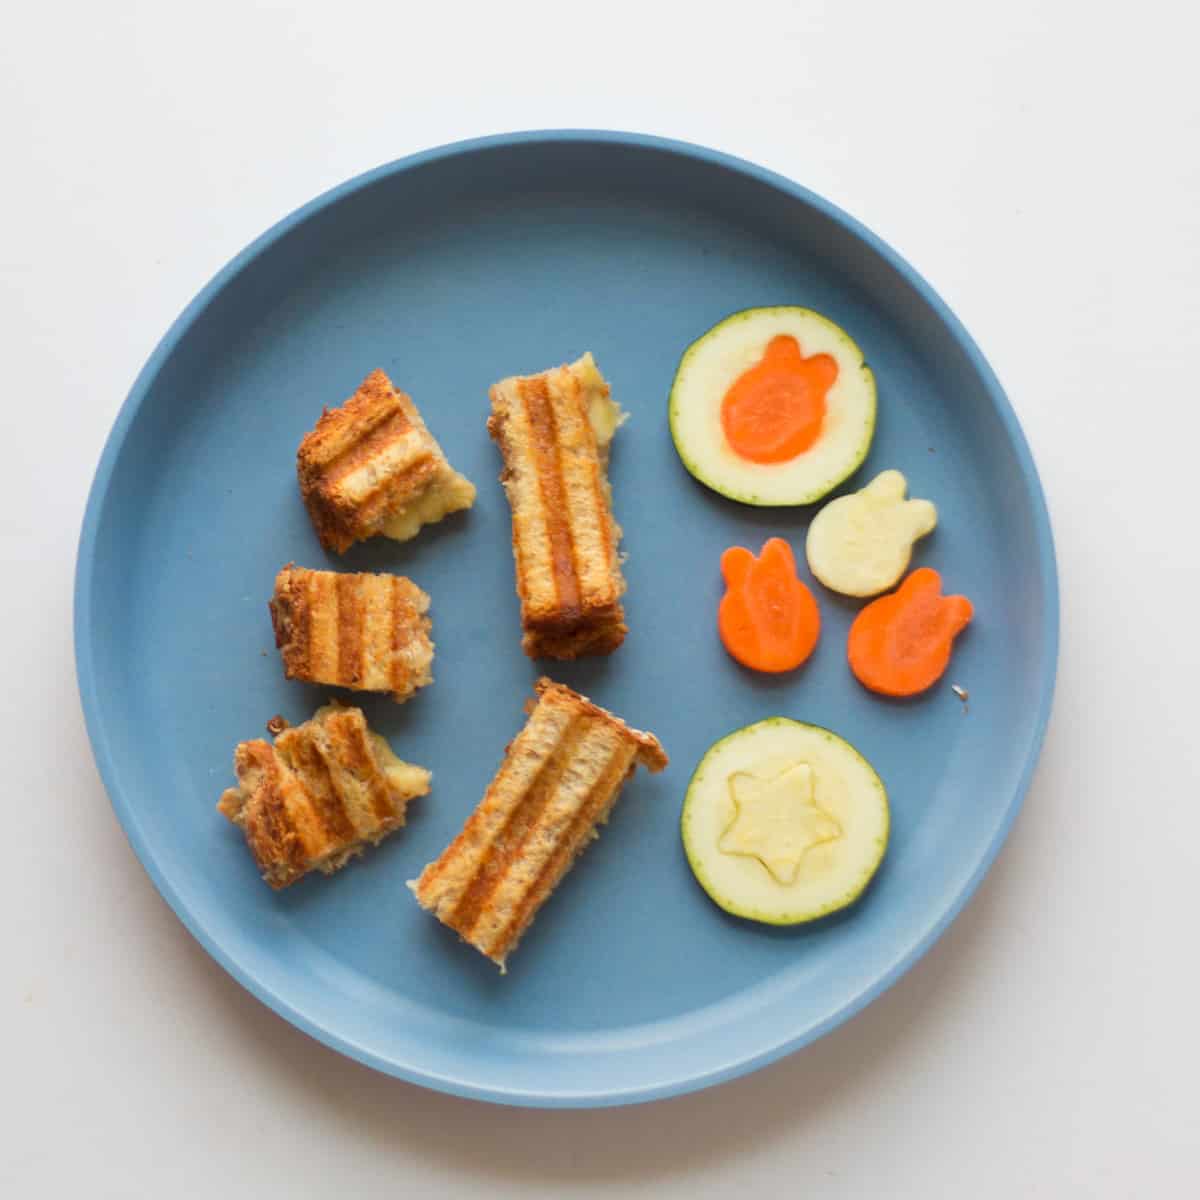 Hummus grilled cheese cut into cubes and strips with zucchini and carrots cut into rabbit and star shapes.